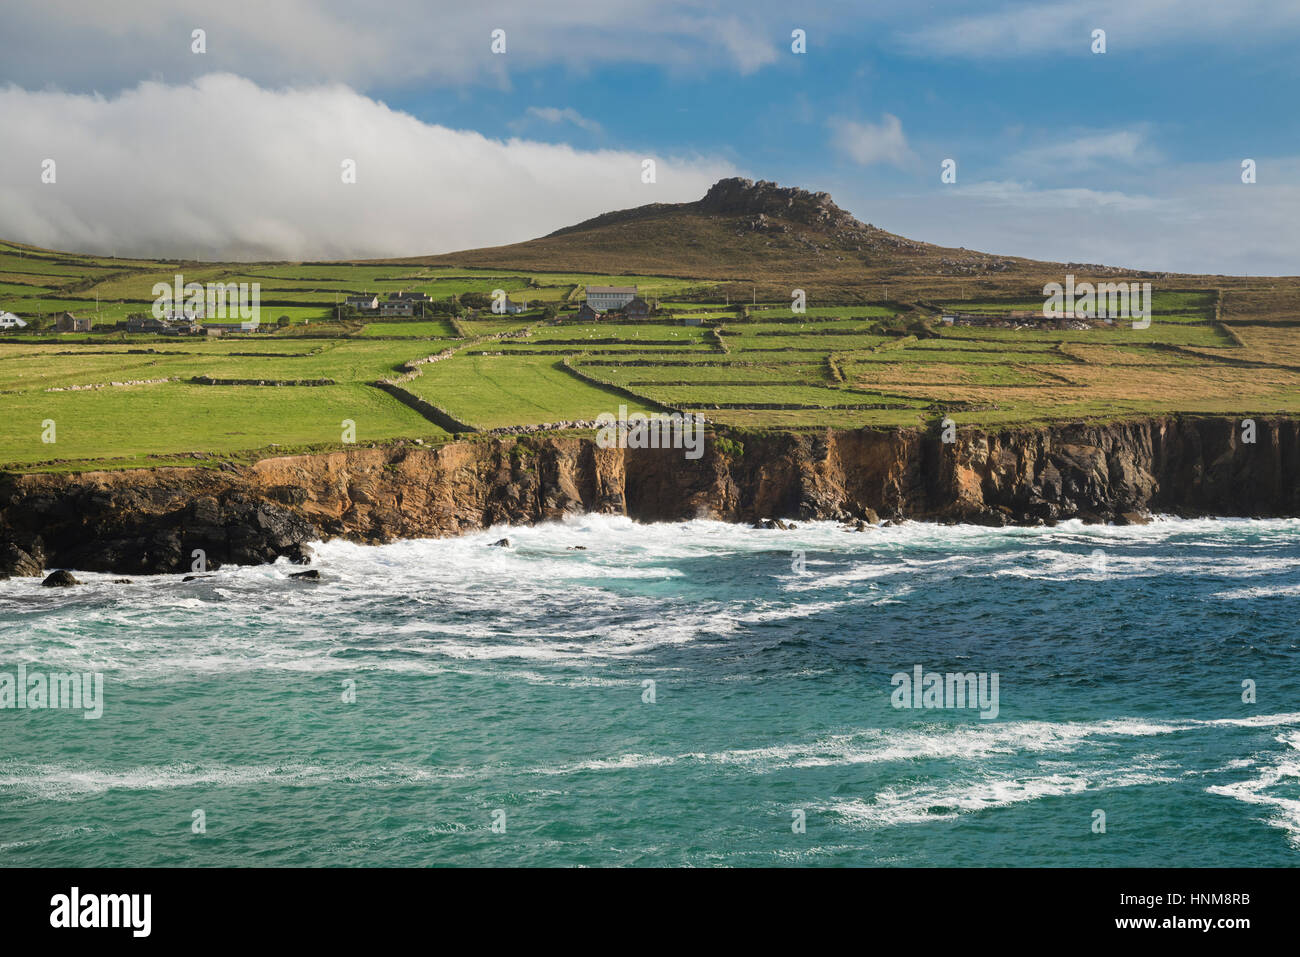 View across Clogher Bay, Clogher, Dingle Peninsula, County Kerry, Ireland Stock Photo